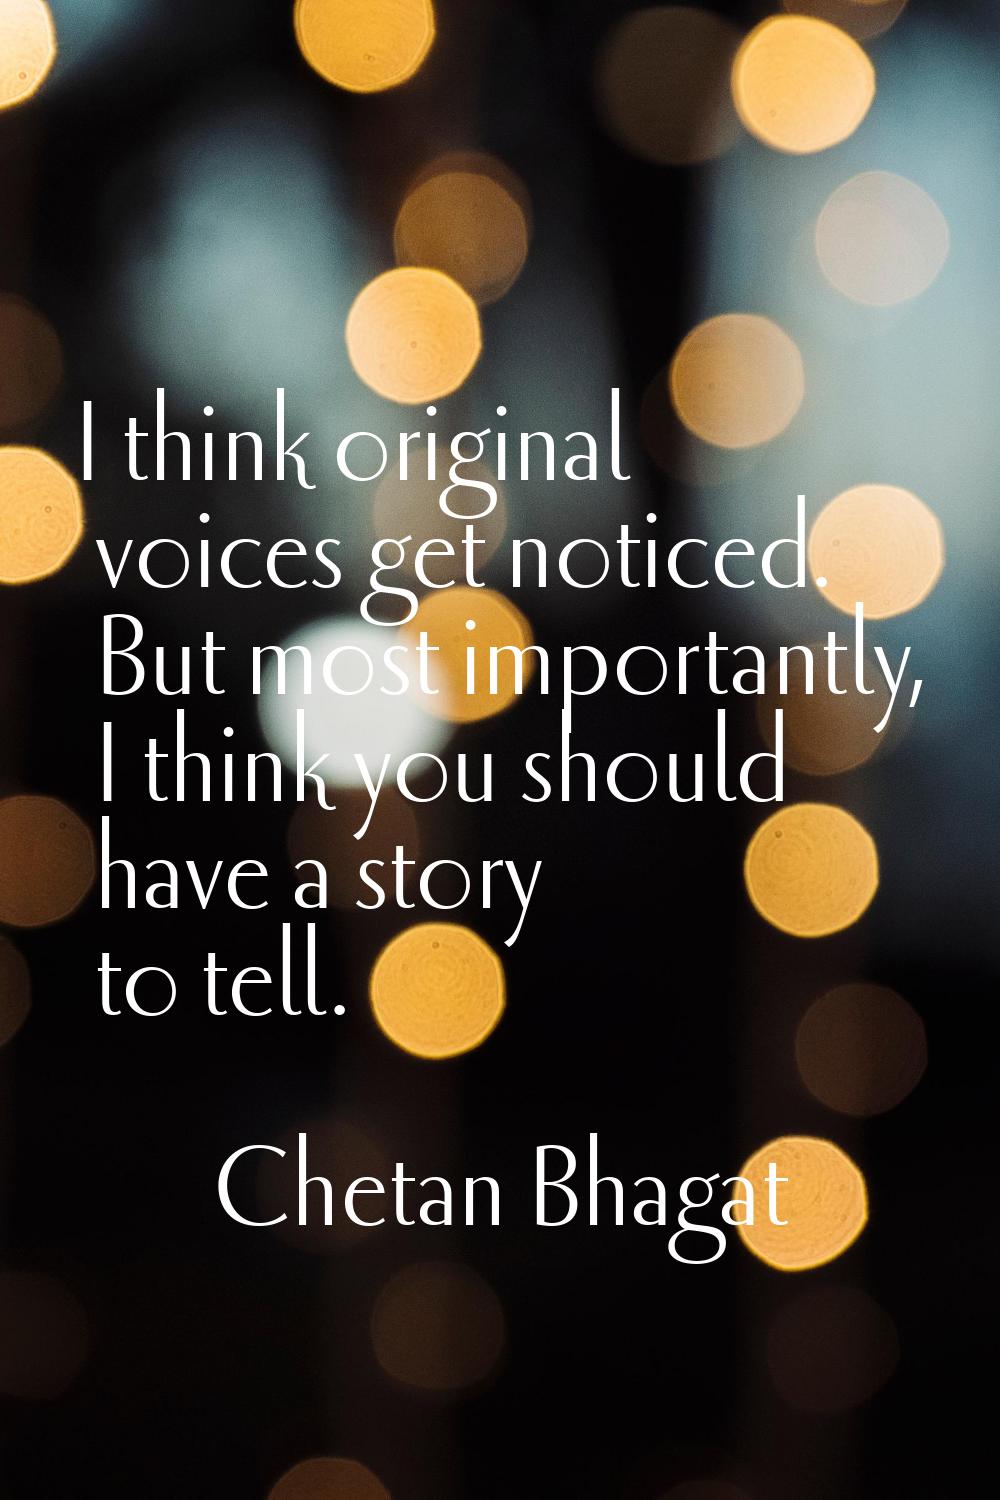 I think original voices get noticed. But most importantly, I think you should have a story to tell.